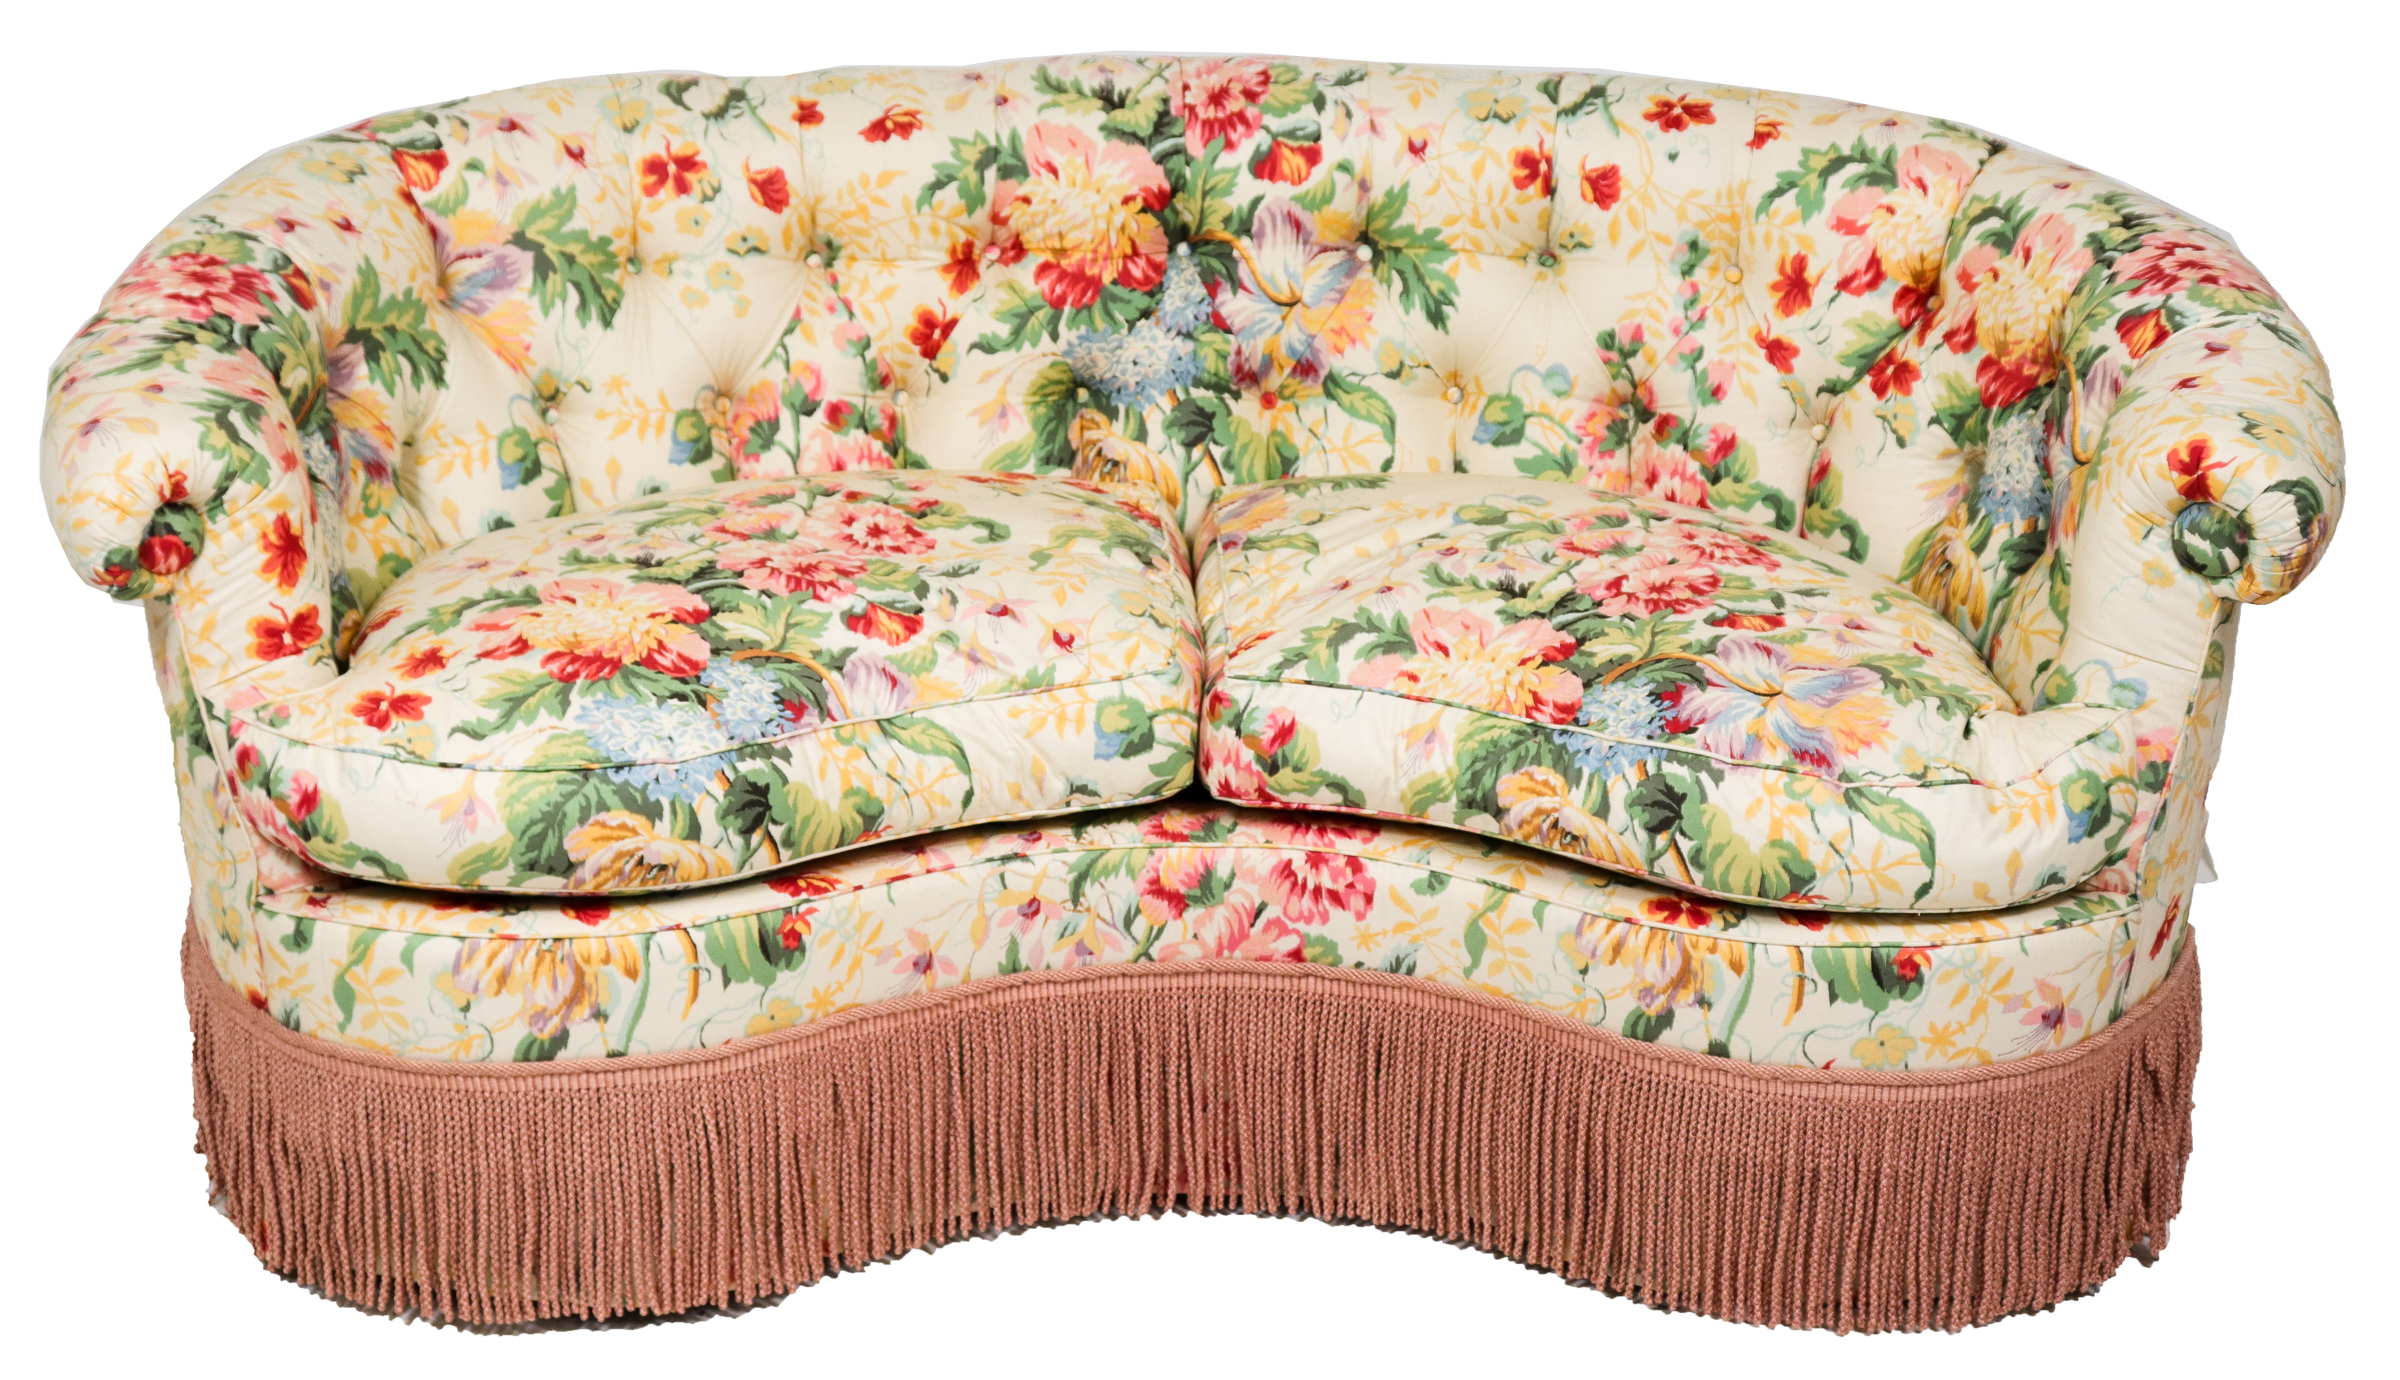 TUFTED FLORAL UPHOLSTERED ROUND 3c2c73